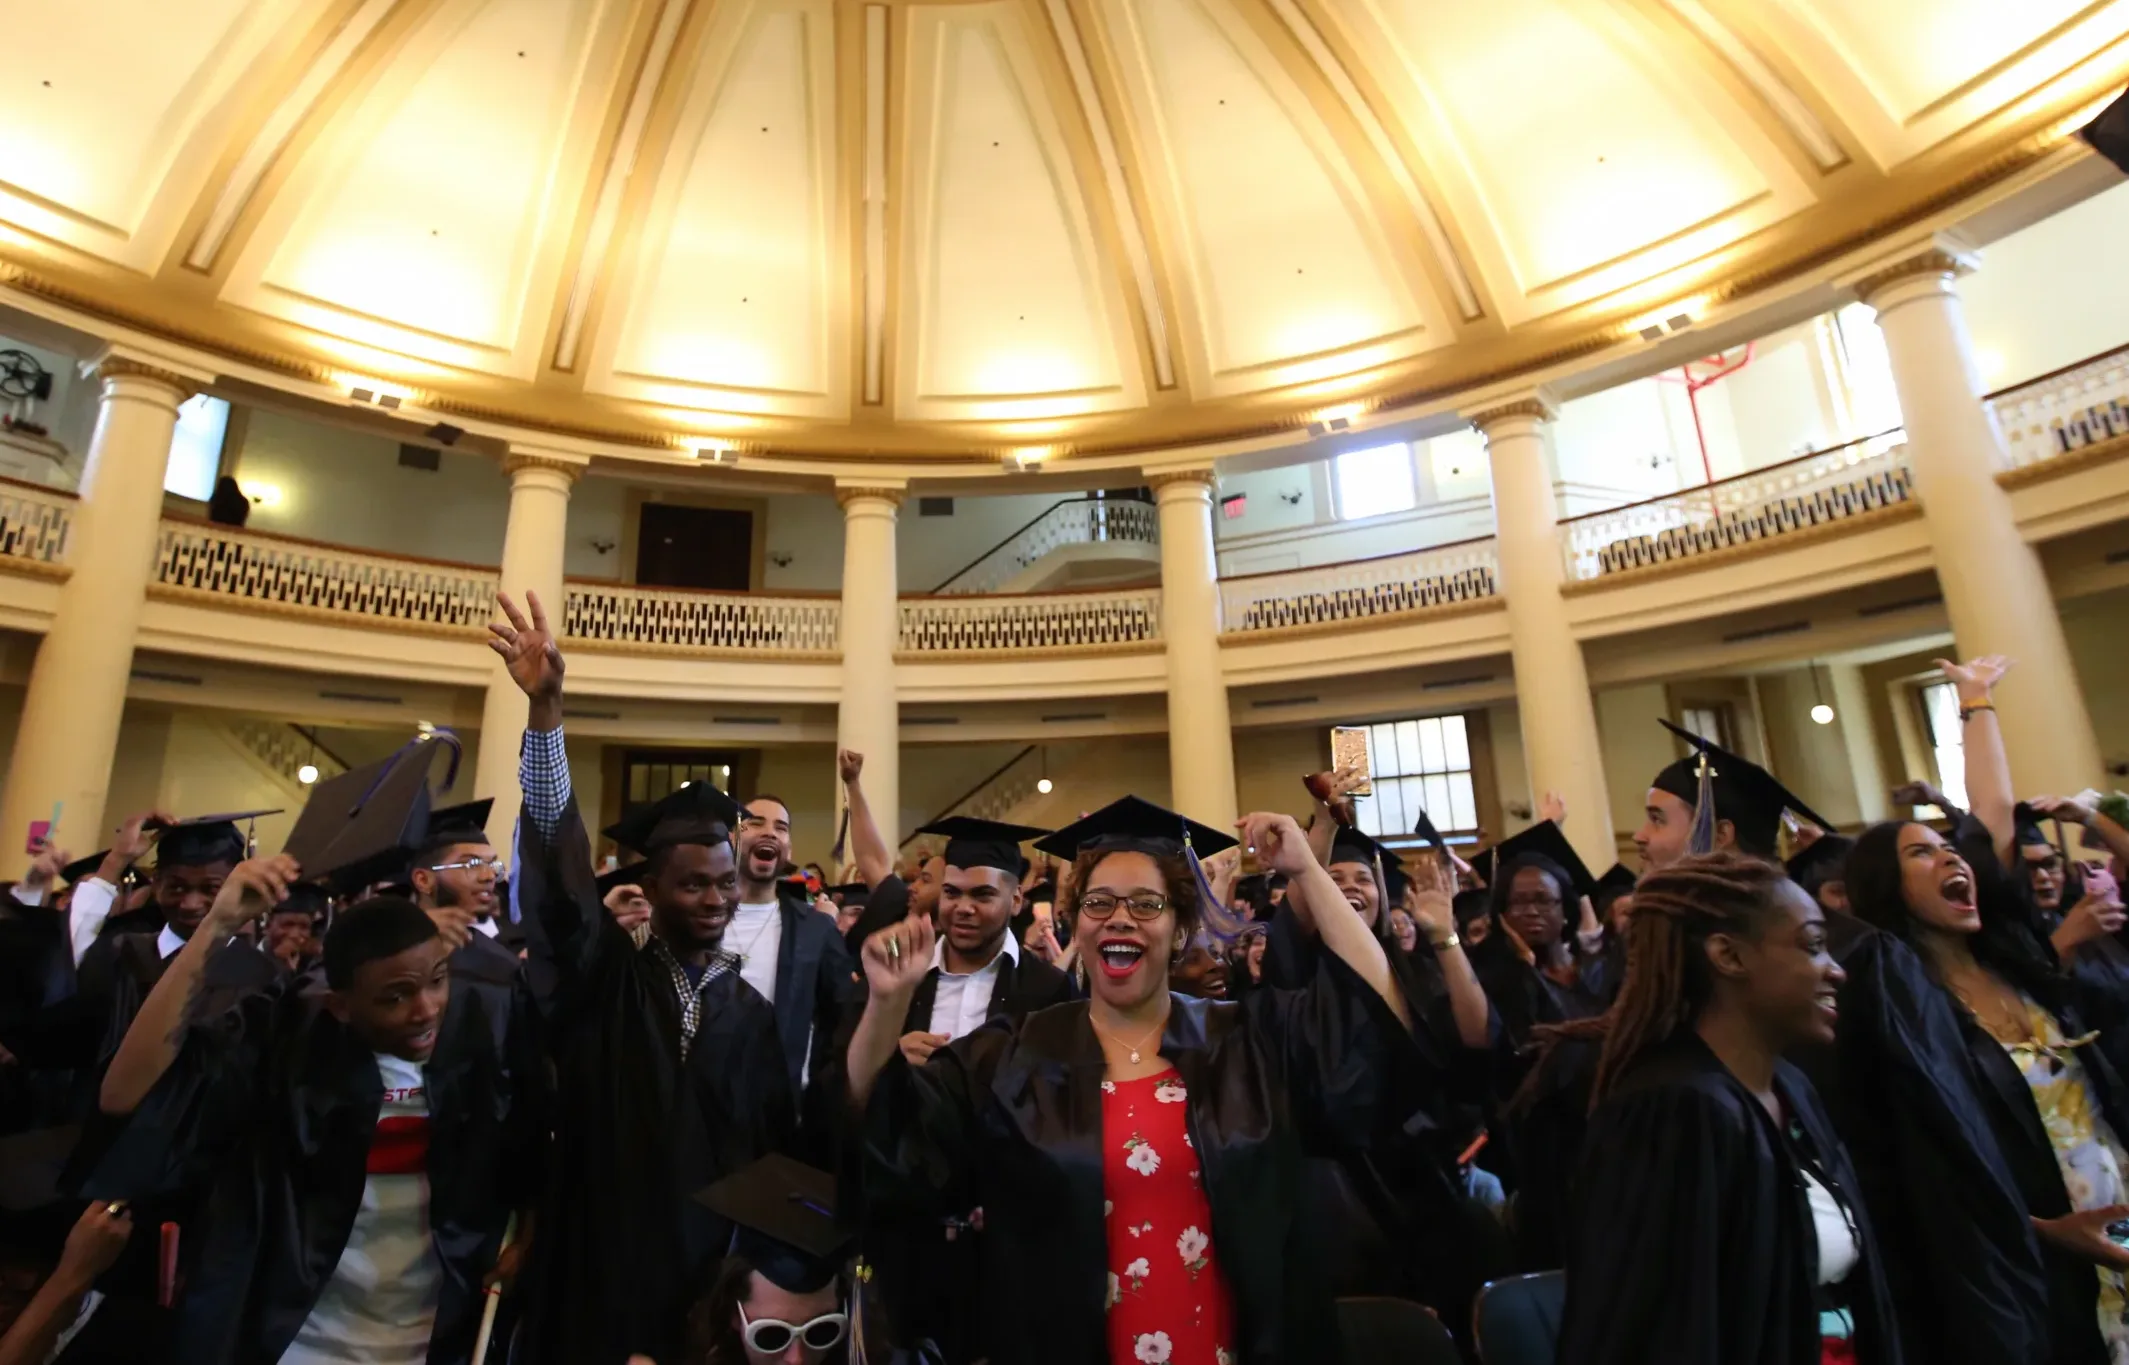 College students celebrating at a graduation ceremony.